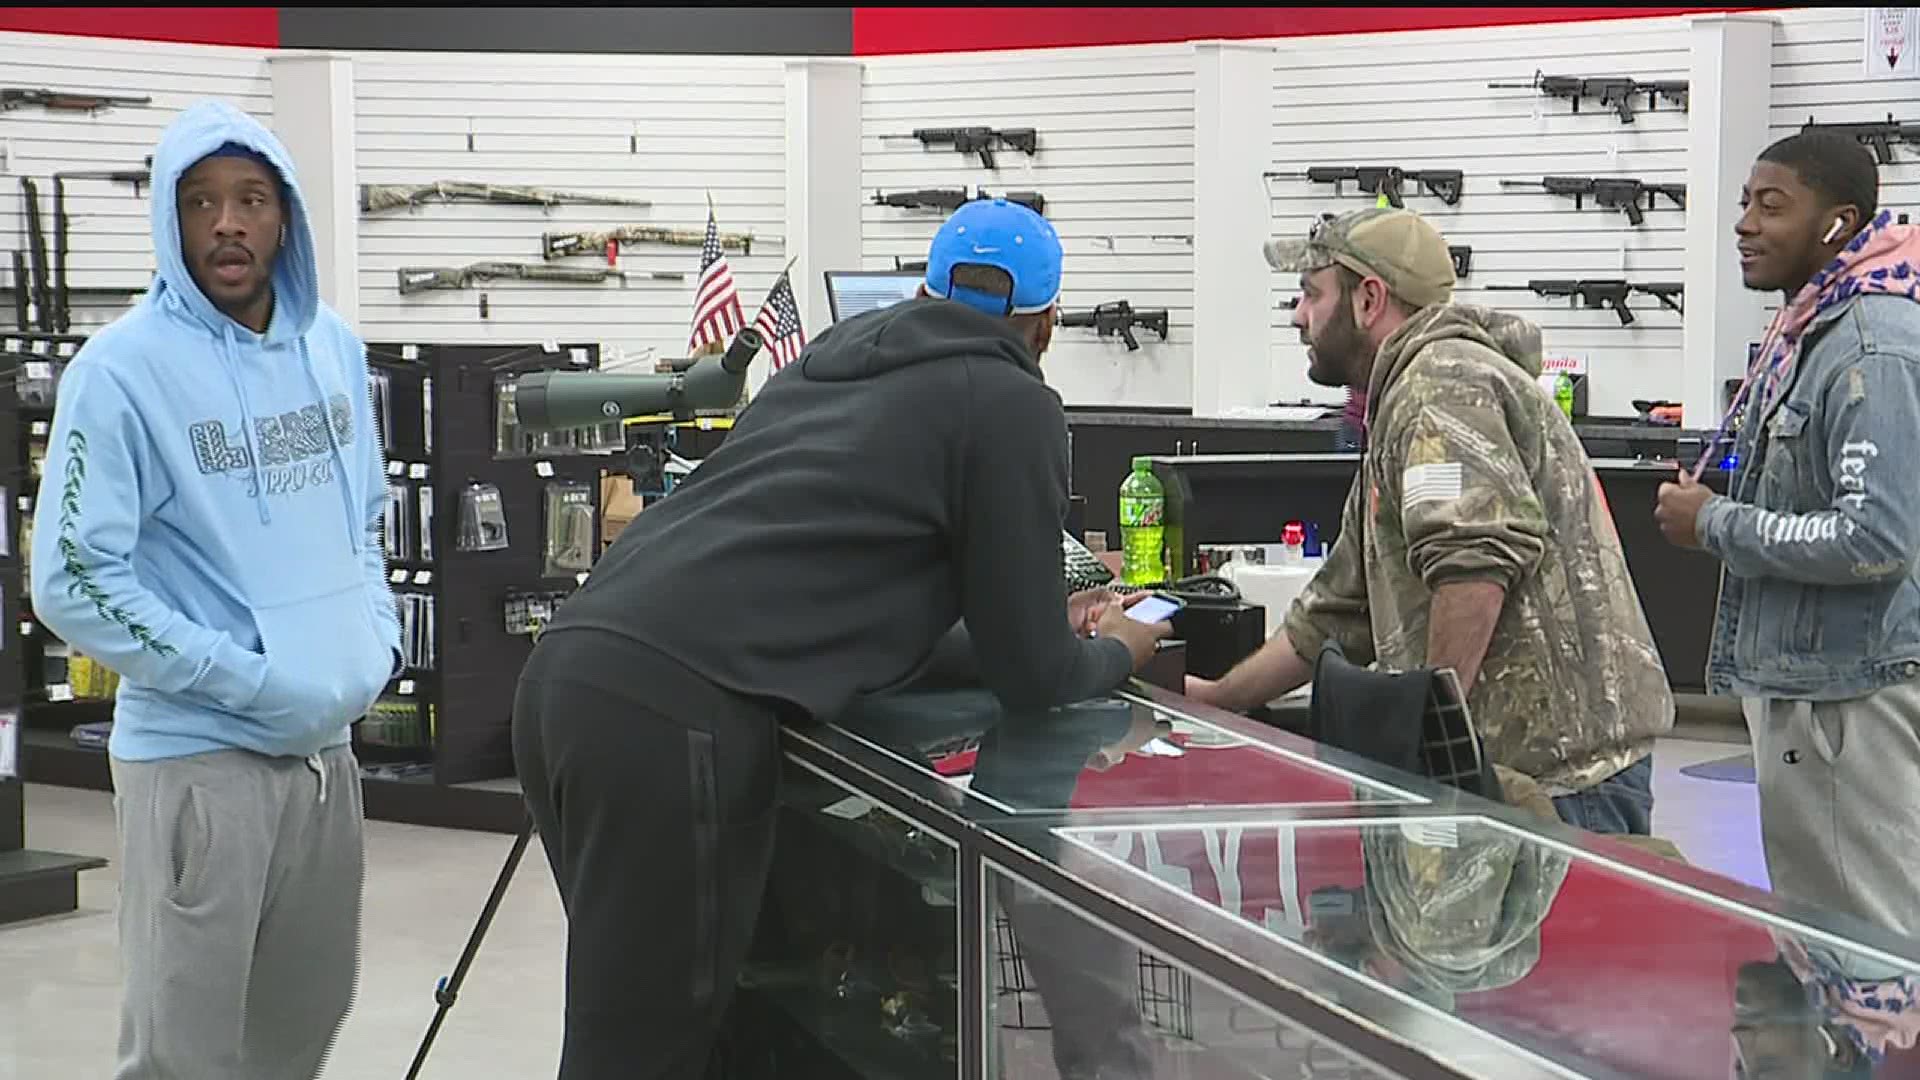 One business that will not have to close is gun shops. Governor Tom Wolf is reversing his decision, allowing them to reopen.